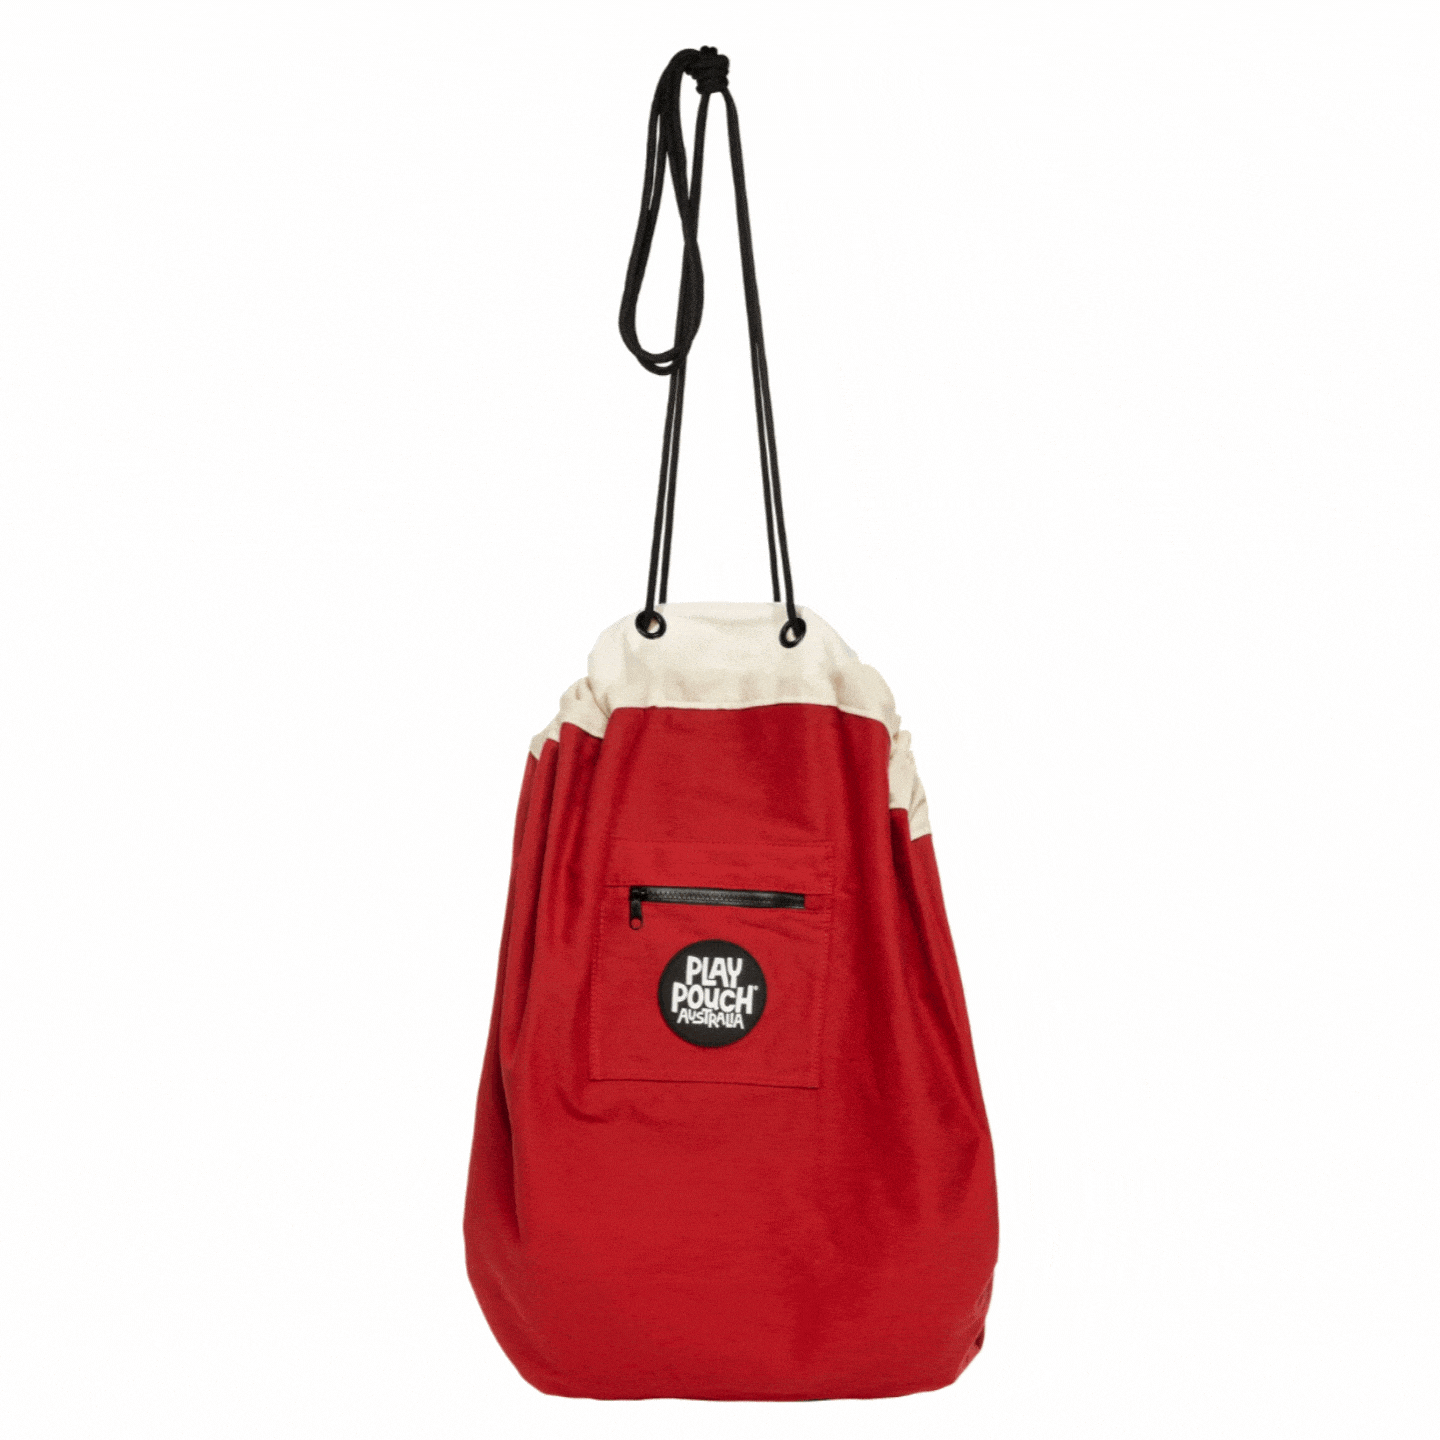 Rocket Red Play Pouch